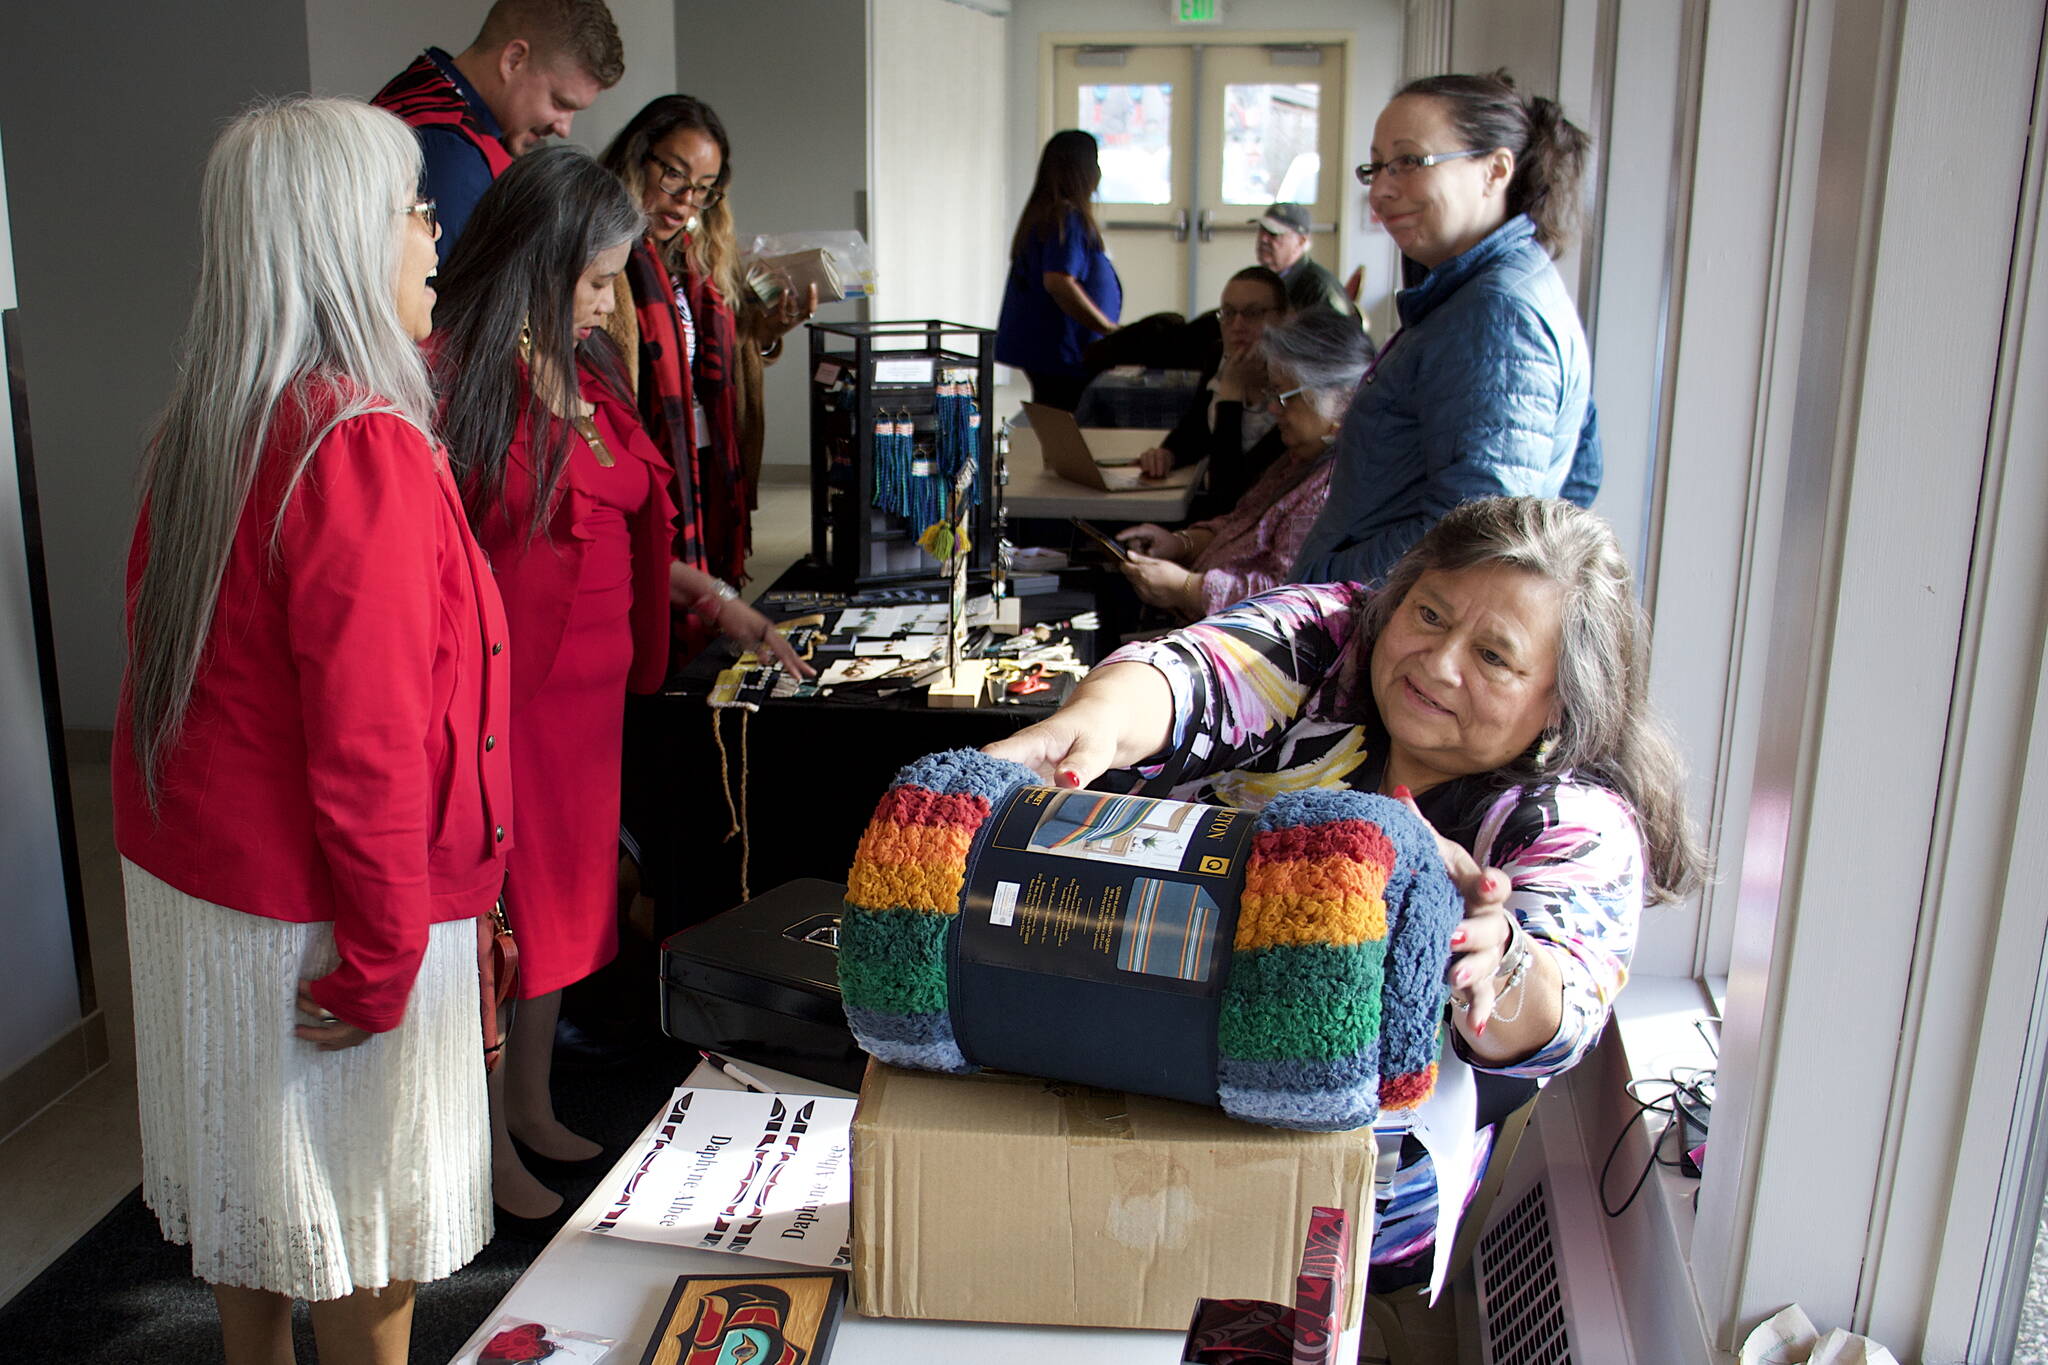 Cindy Pederson, sets up a display table for raffle items in a hallway at Elizabeth Peratrovich Hall during the 88th annual Tribal Assembly of the Central Council of the Tlingit and Haida Indian Tribes of Alaska. Pederson, a Seattle resident and delegate for nearly 20 years until taking a job with the tribe’s COVID-19 relief program last year, was named the tribe’s Delegate/Citizen of the Year on Thursday. (Mark Sabbatini / Juneau Empire)